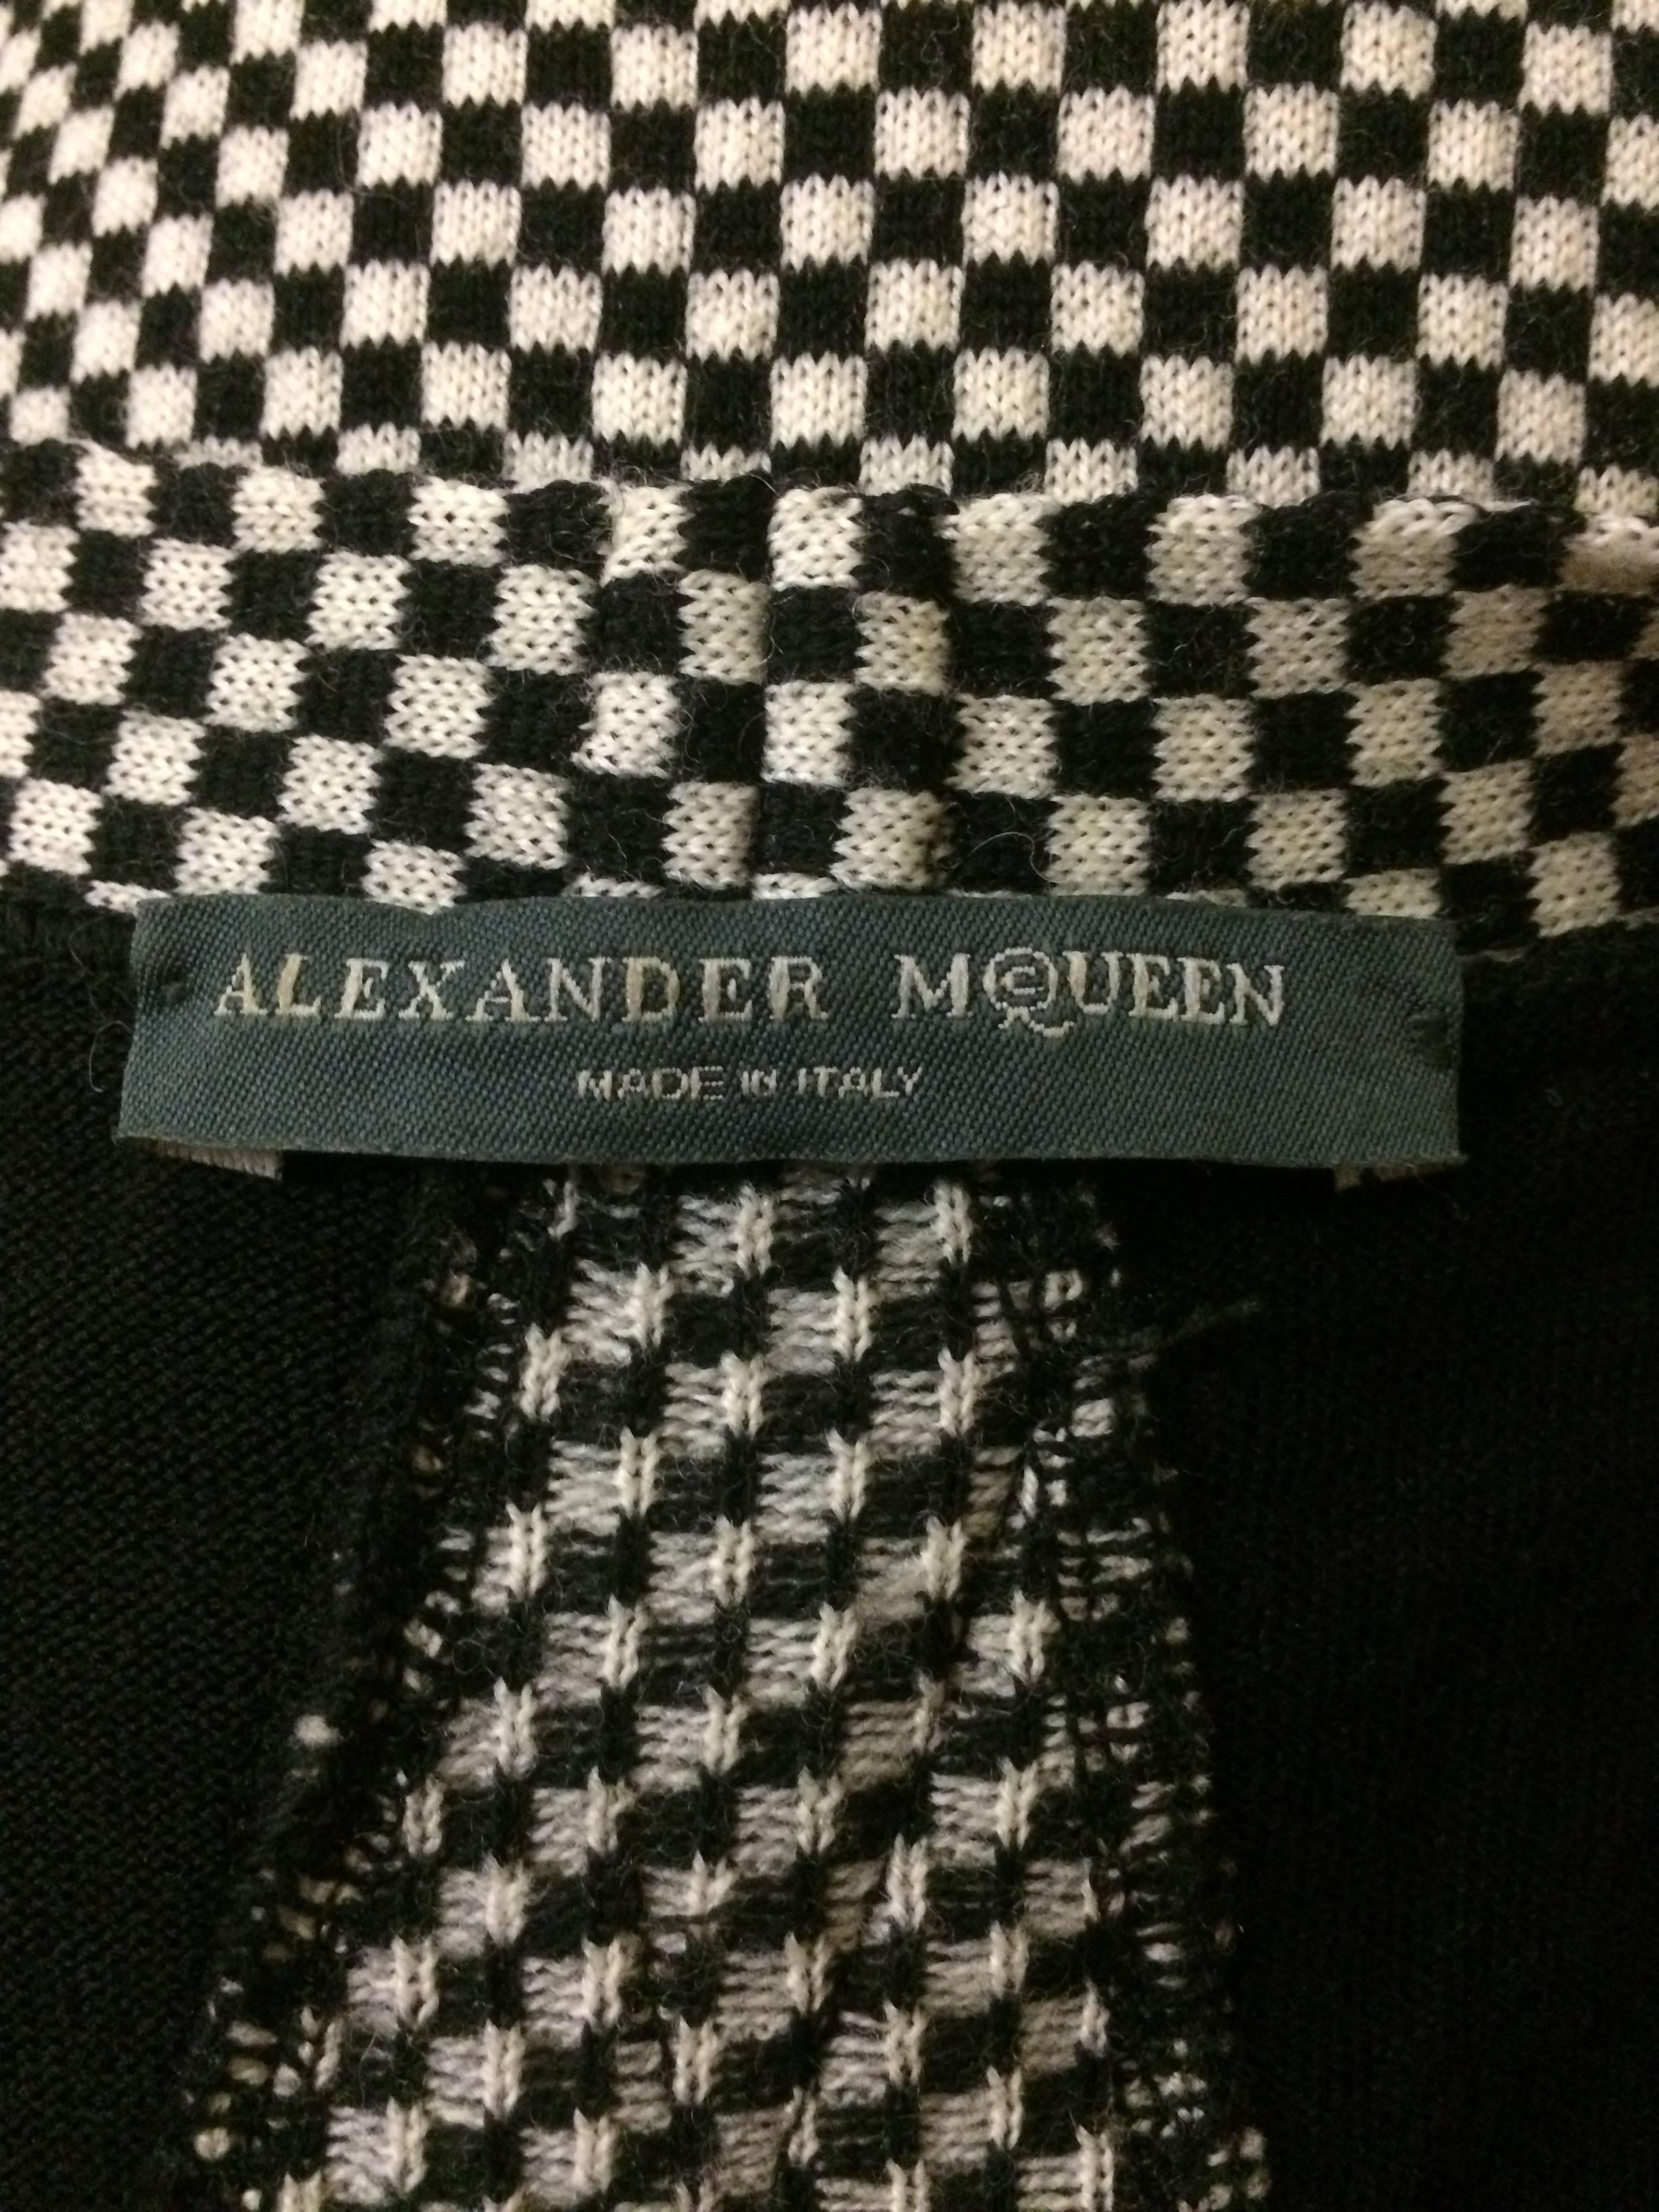 Alexander McQueen 2003 Scanners Collection Black and White Checked ...